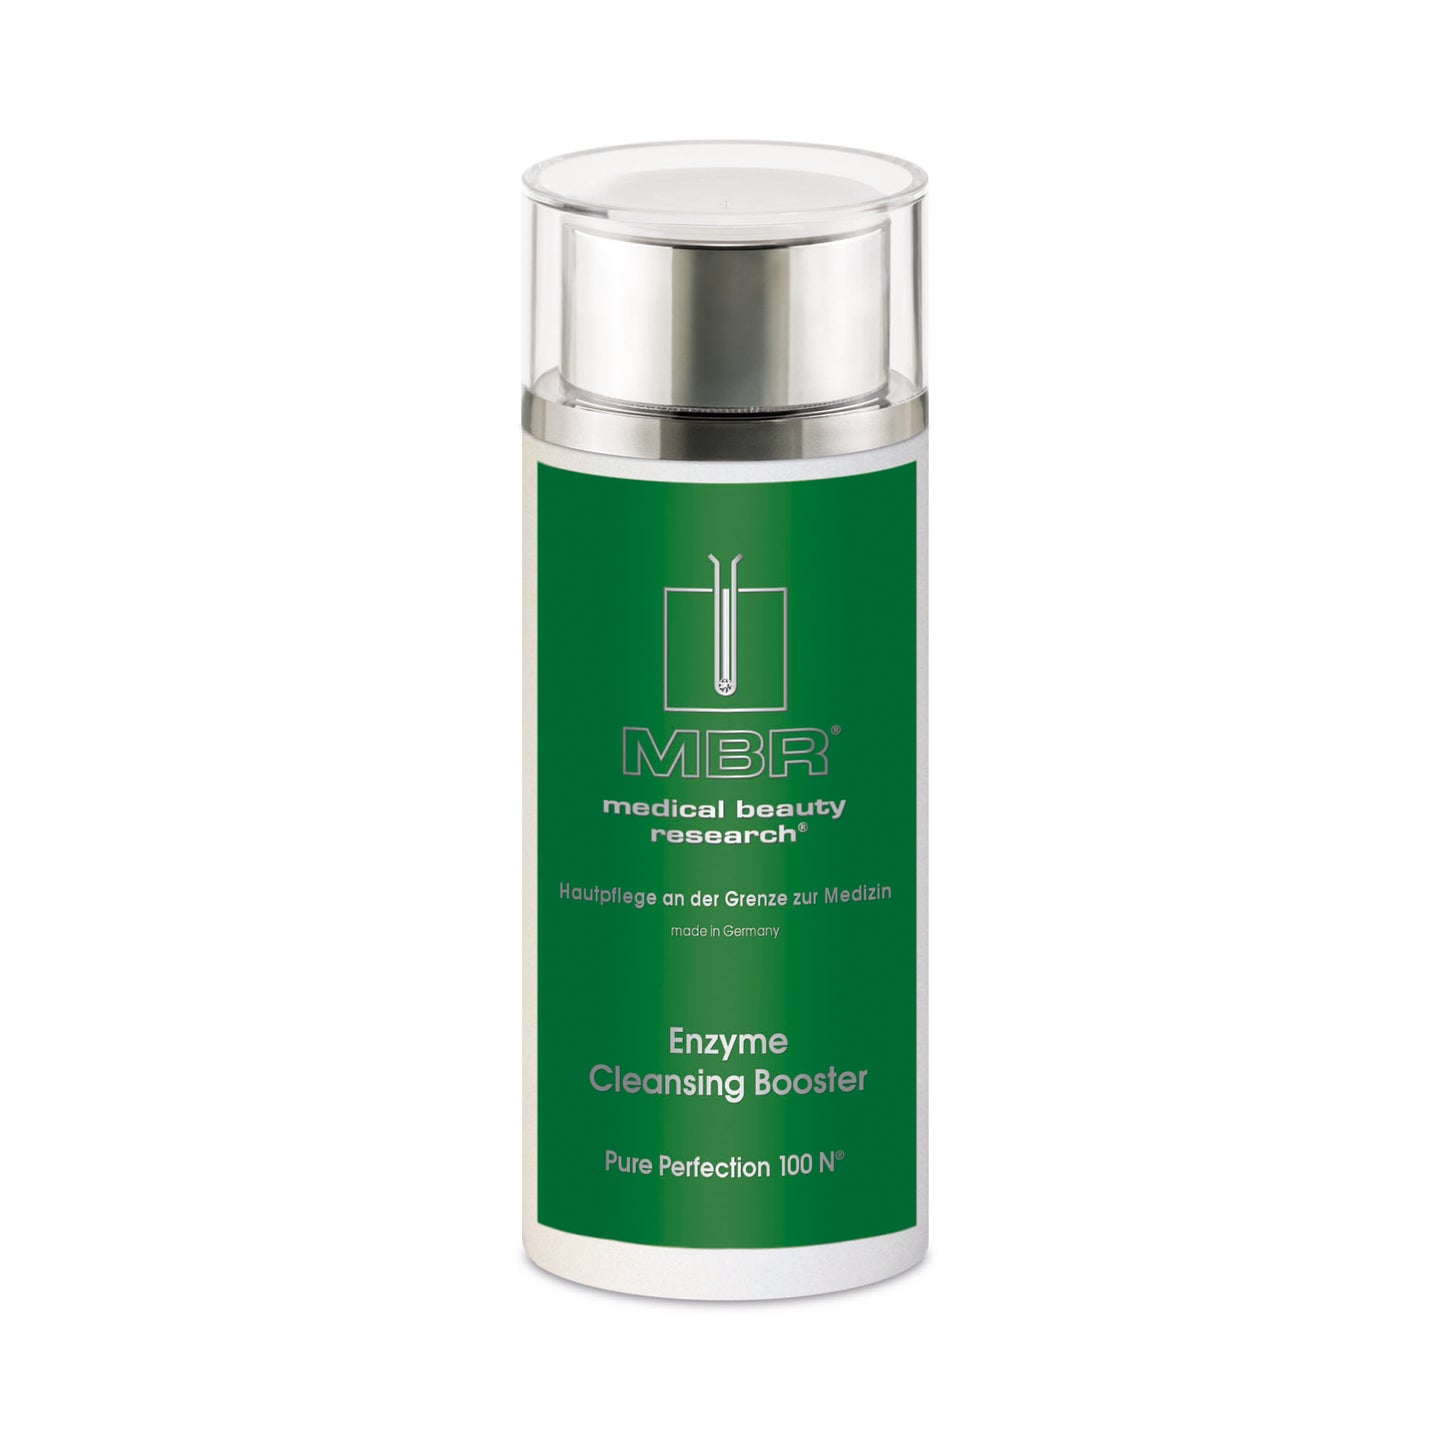 Enzyme Cleansing Booster: Detoxifying, Brightening and Regenerating Powder Cleanser